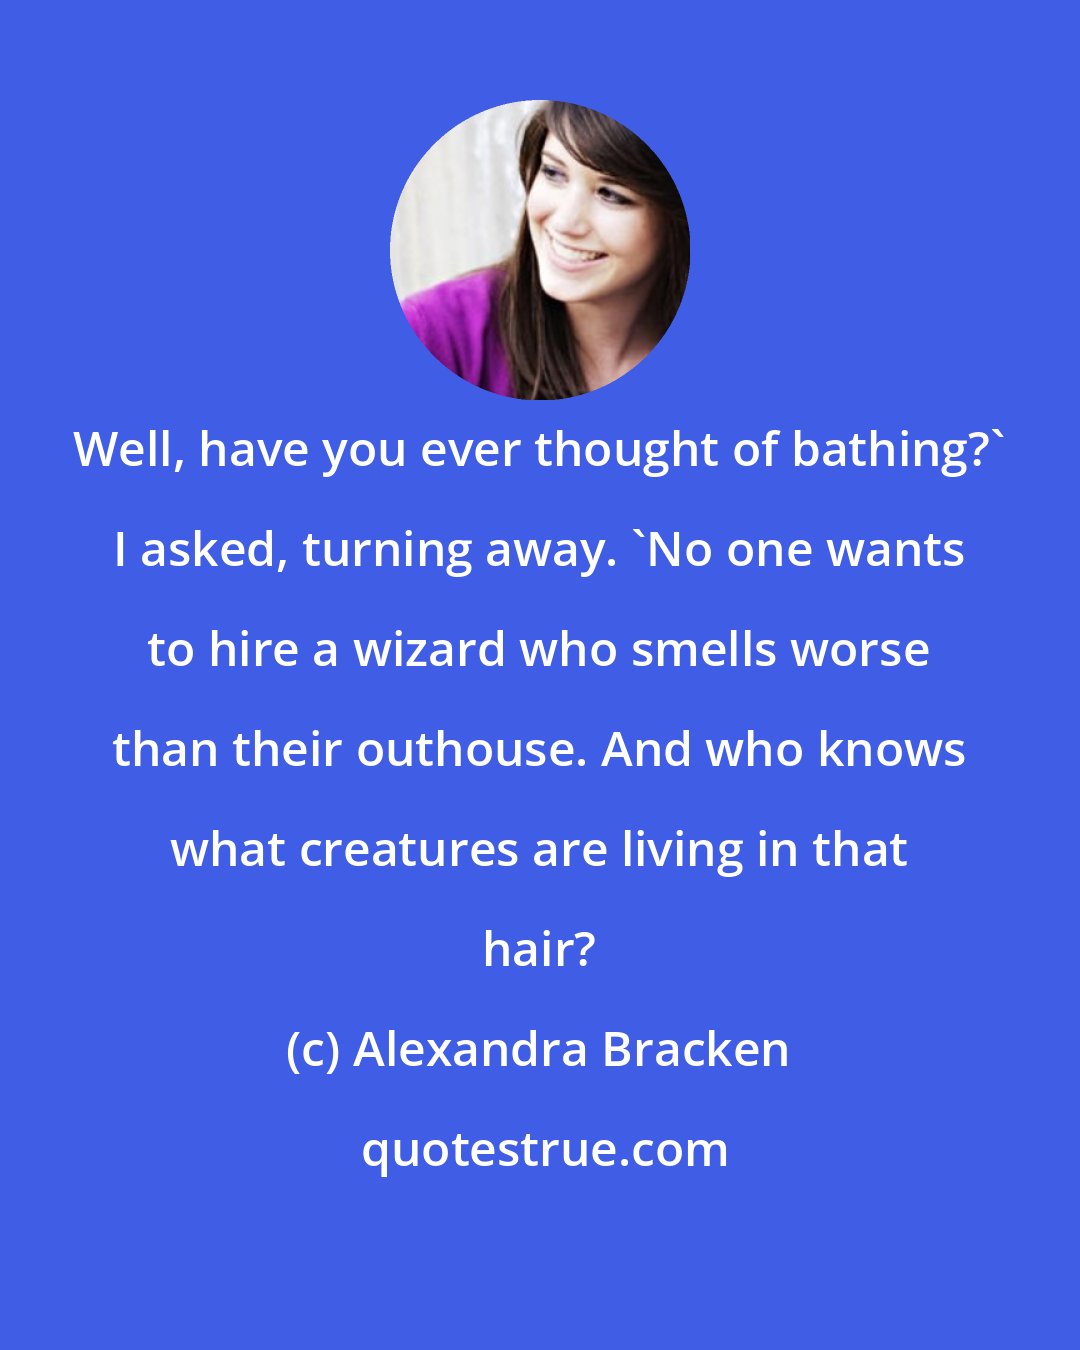 Alexandra Bracken: Well, have you ever thought of bathing?' I asked, turning away. 'No one wants to hire a wizard who smells worse than their outhouse. And who knows what creatures are living in that hair?